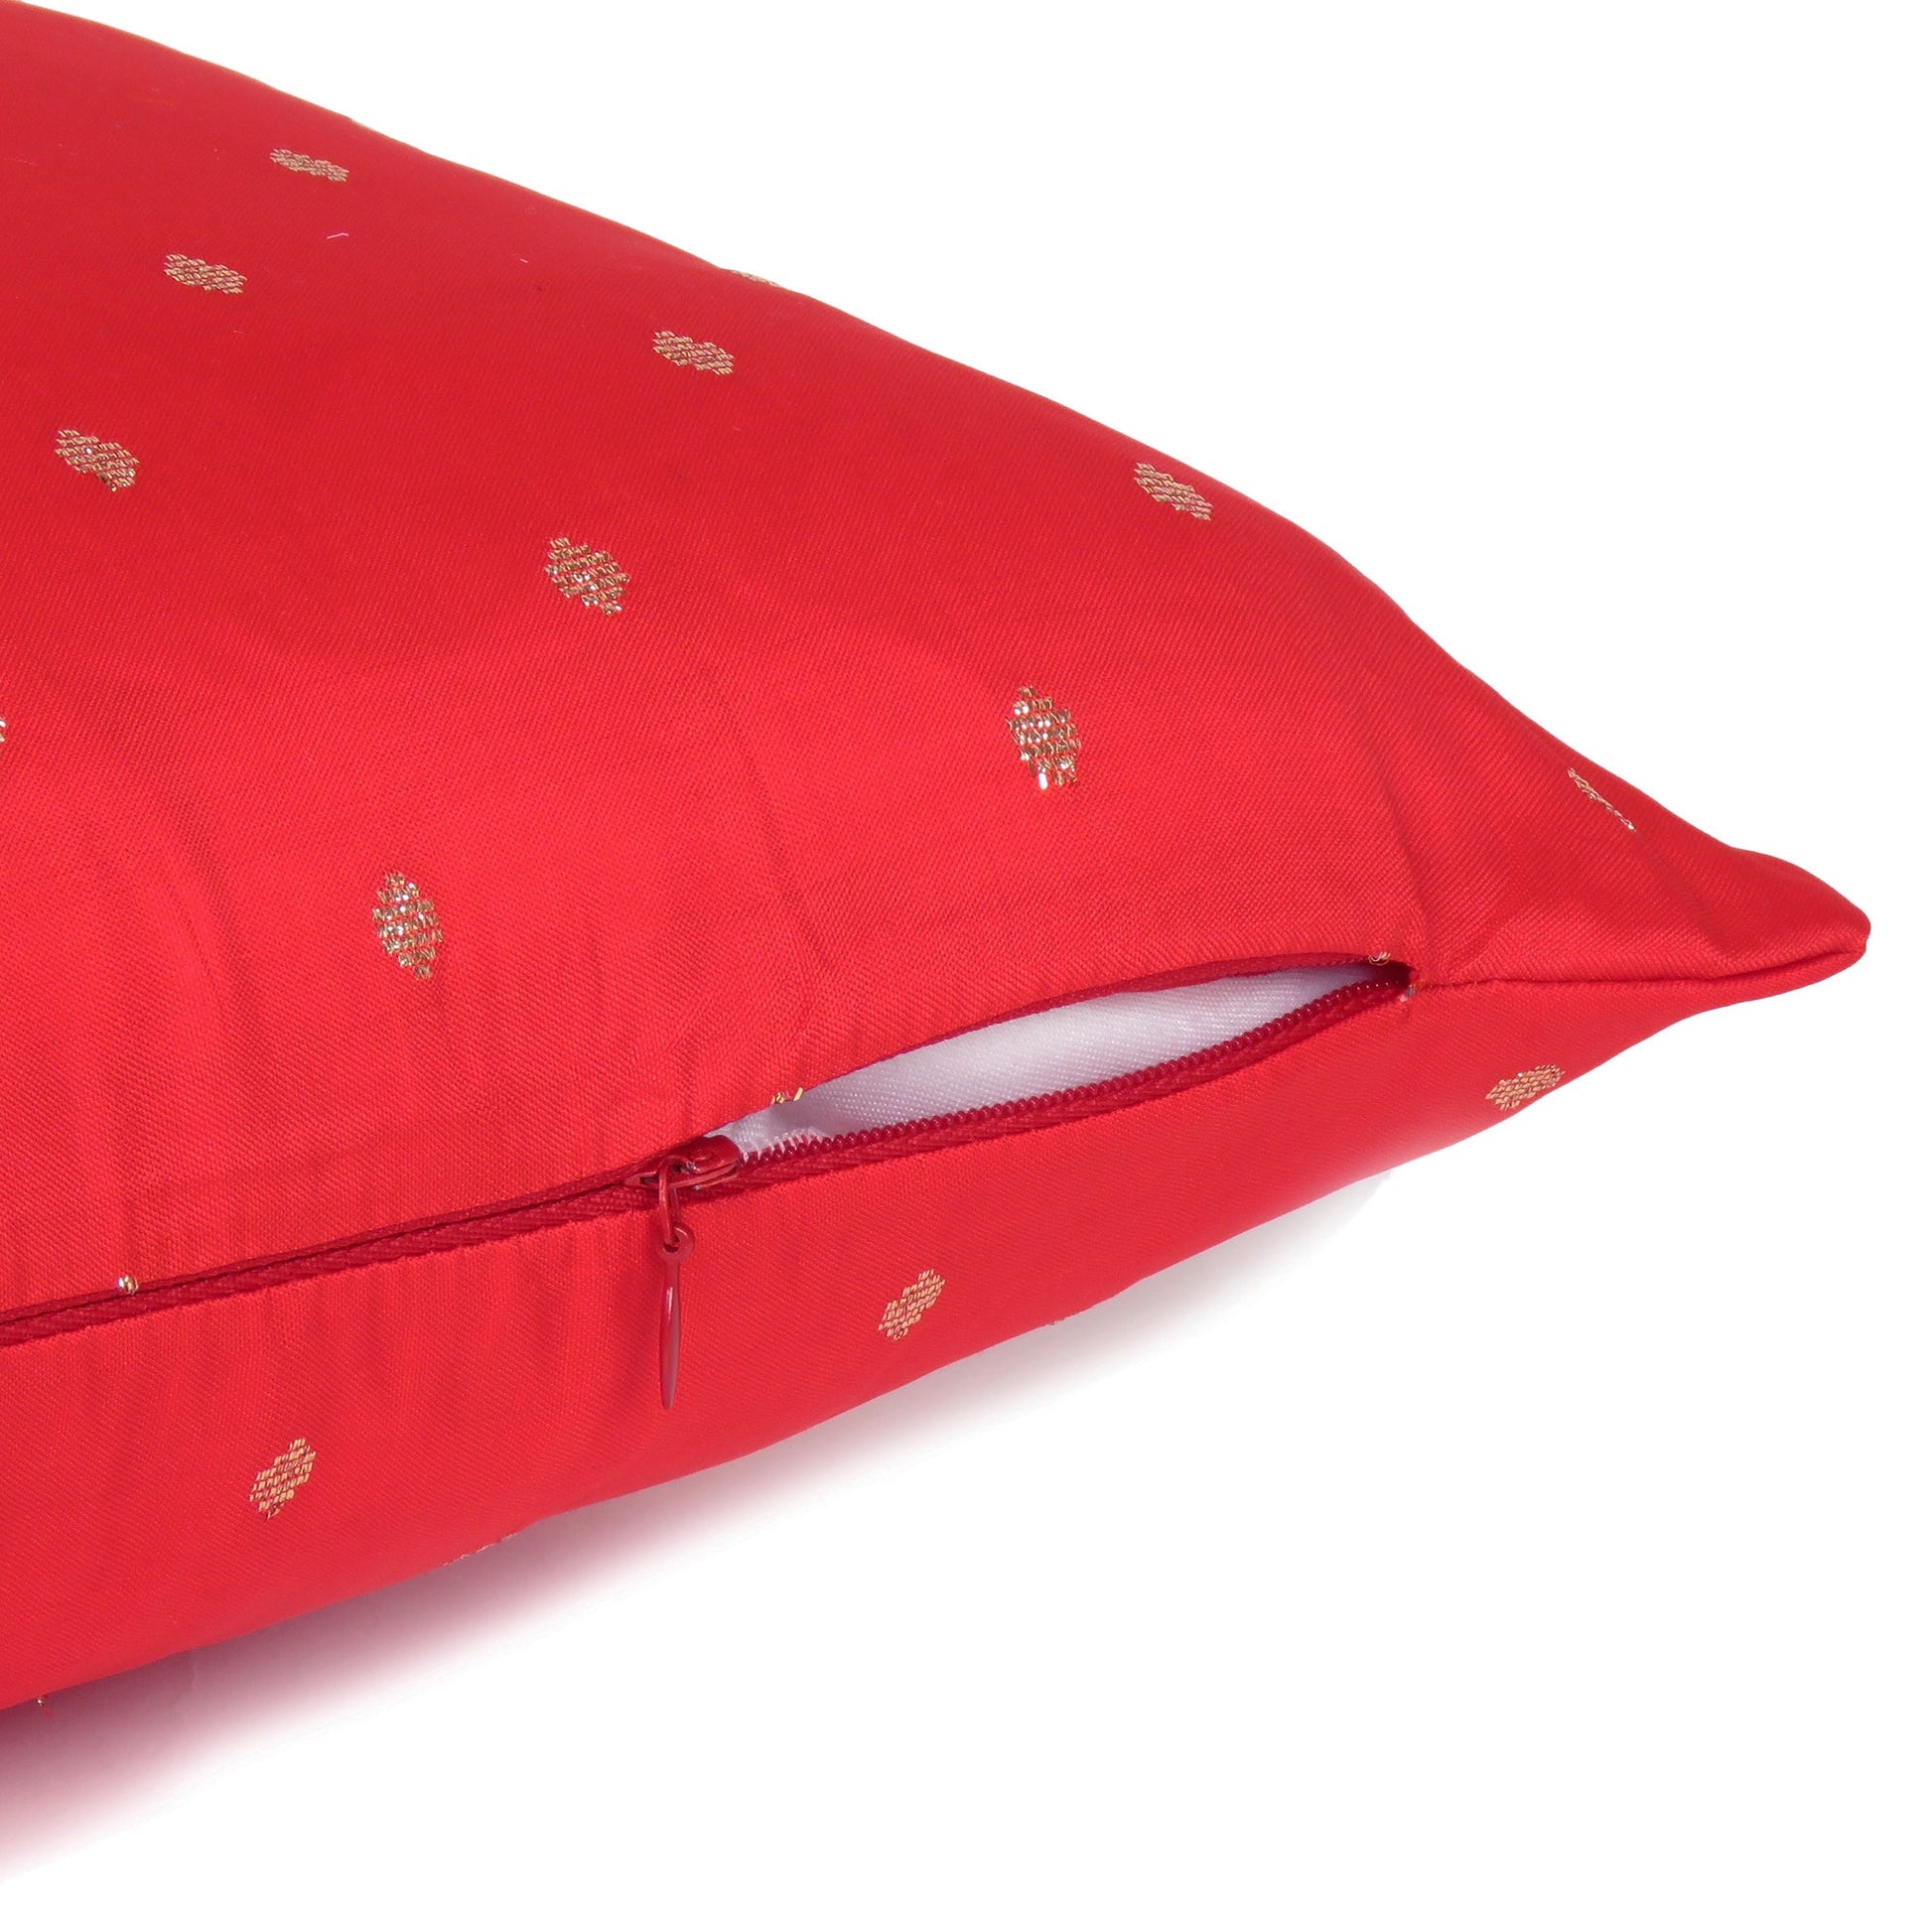 Art Silk Polka Dot Cushion Cover in Set of 2 - Bright Red